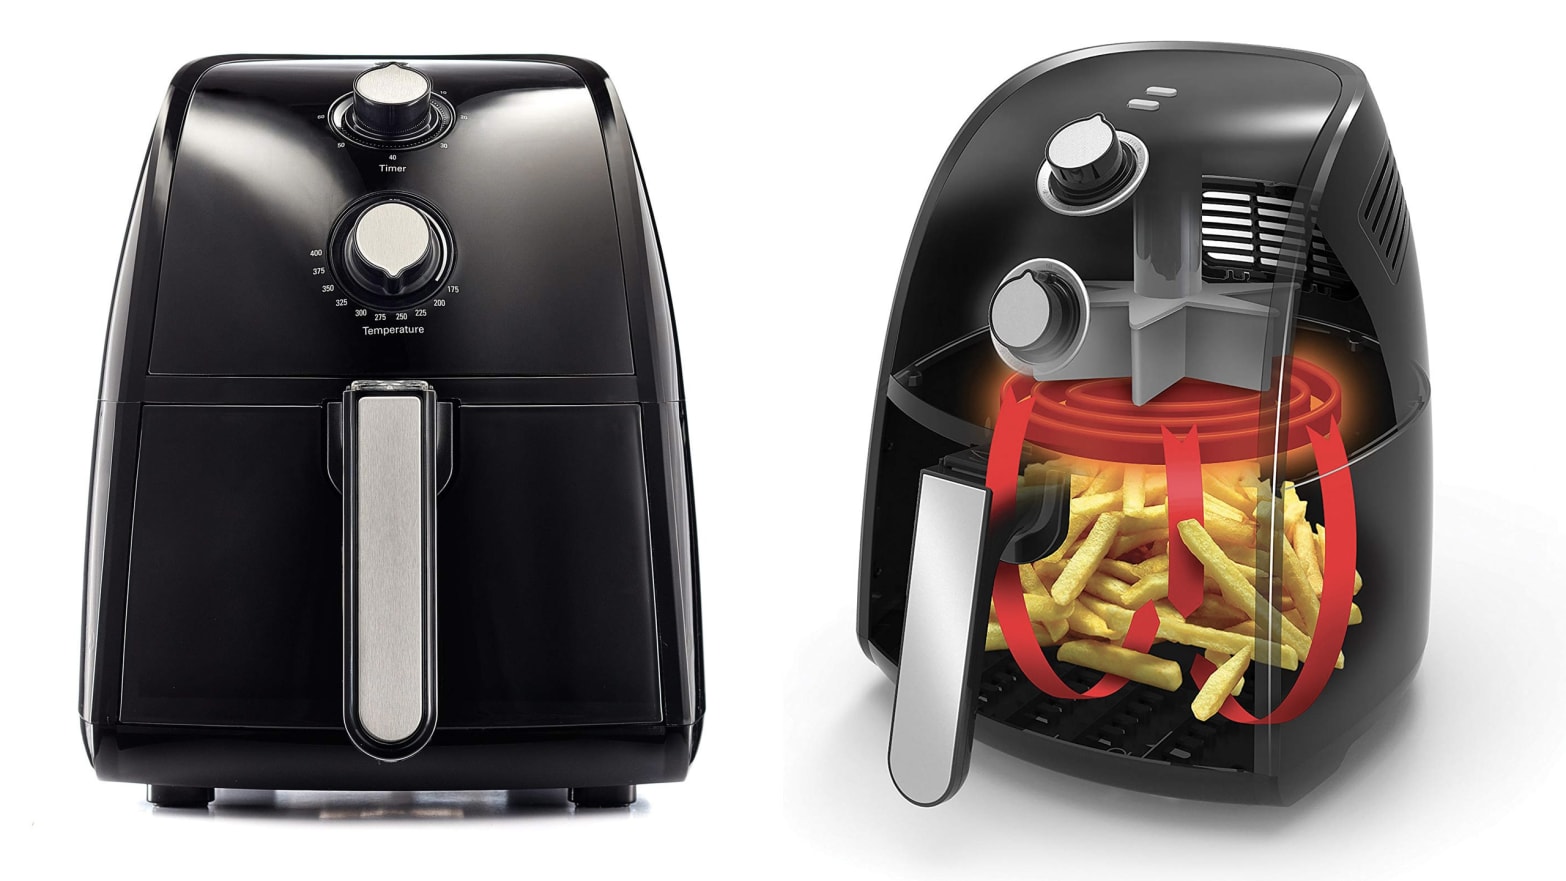 The BELLA Air Fryer on  Could Not Be Easier to Use